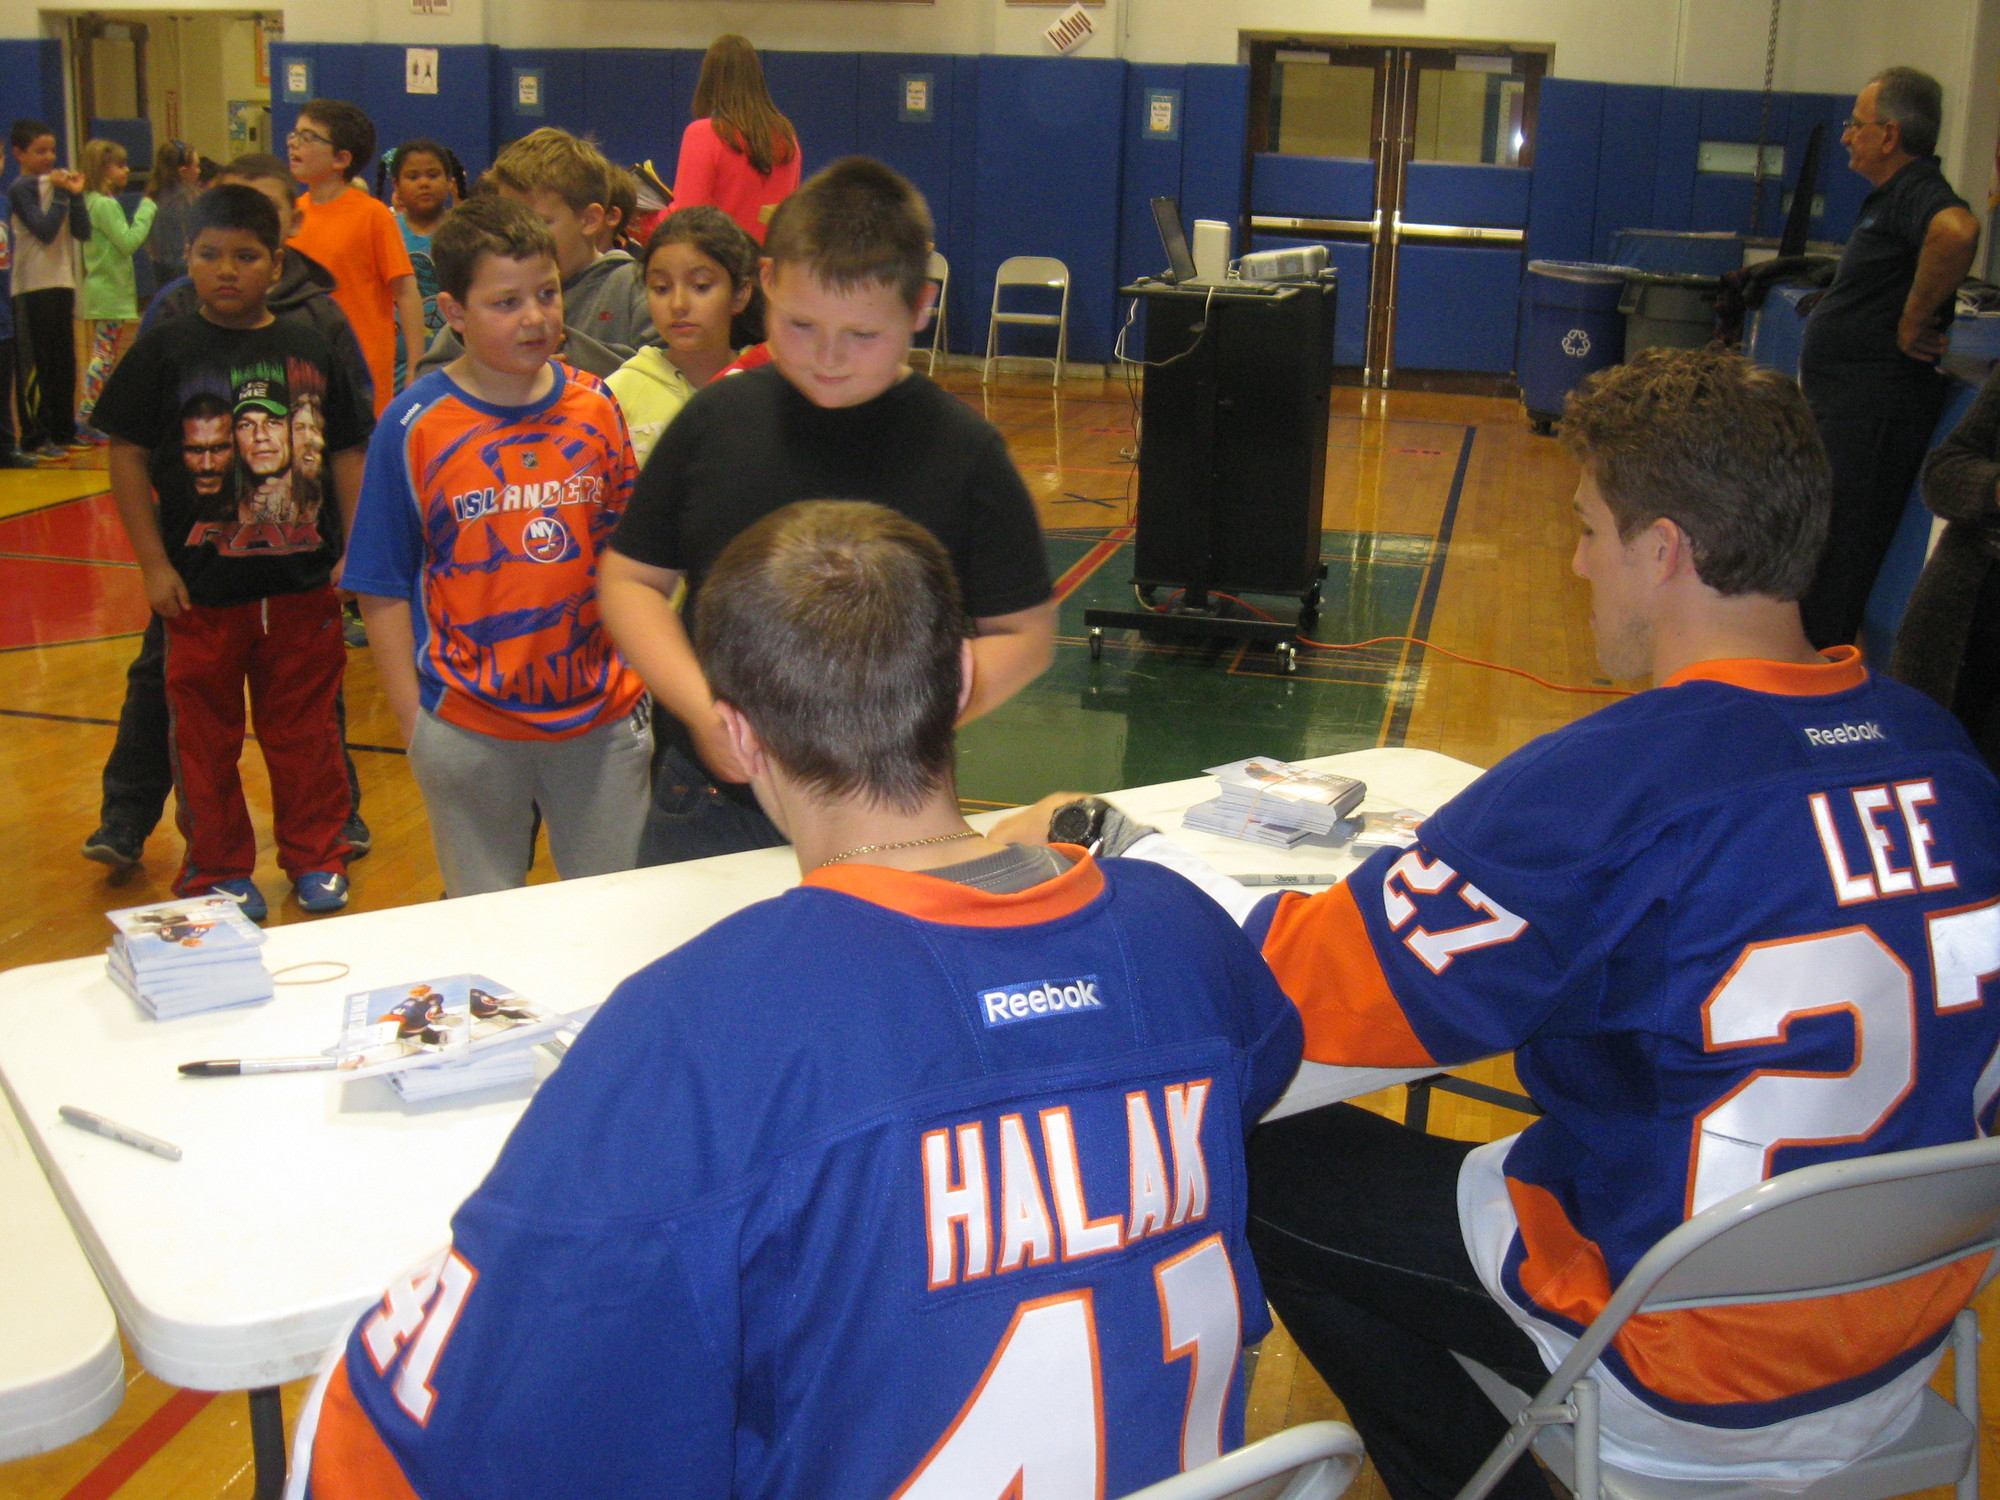 Jaroslav Halak and Anders Lee signed autographs for the students after the assembly.